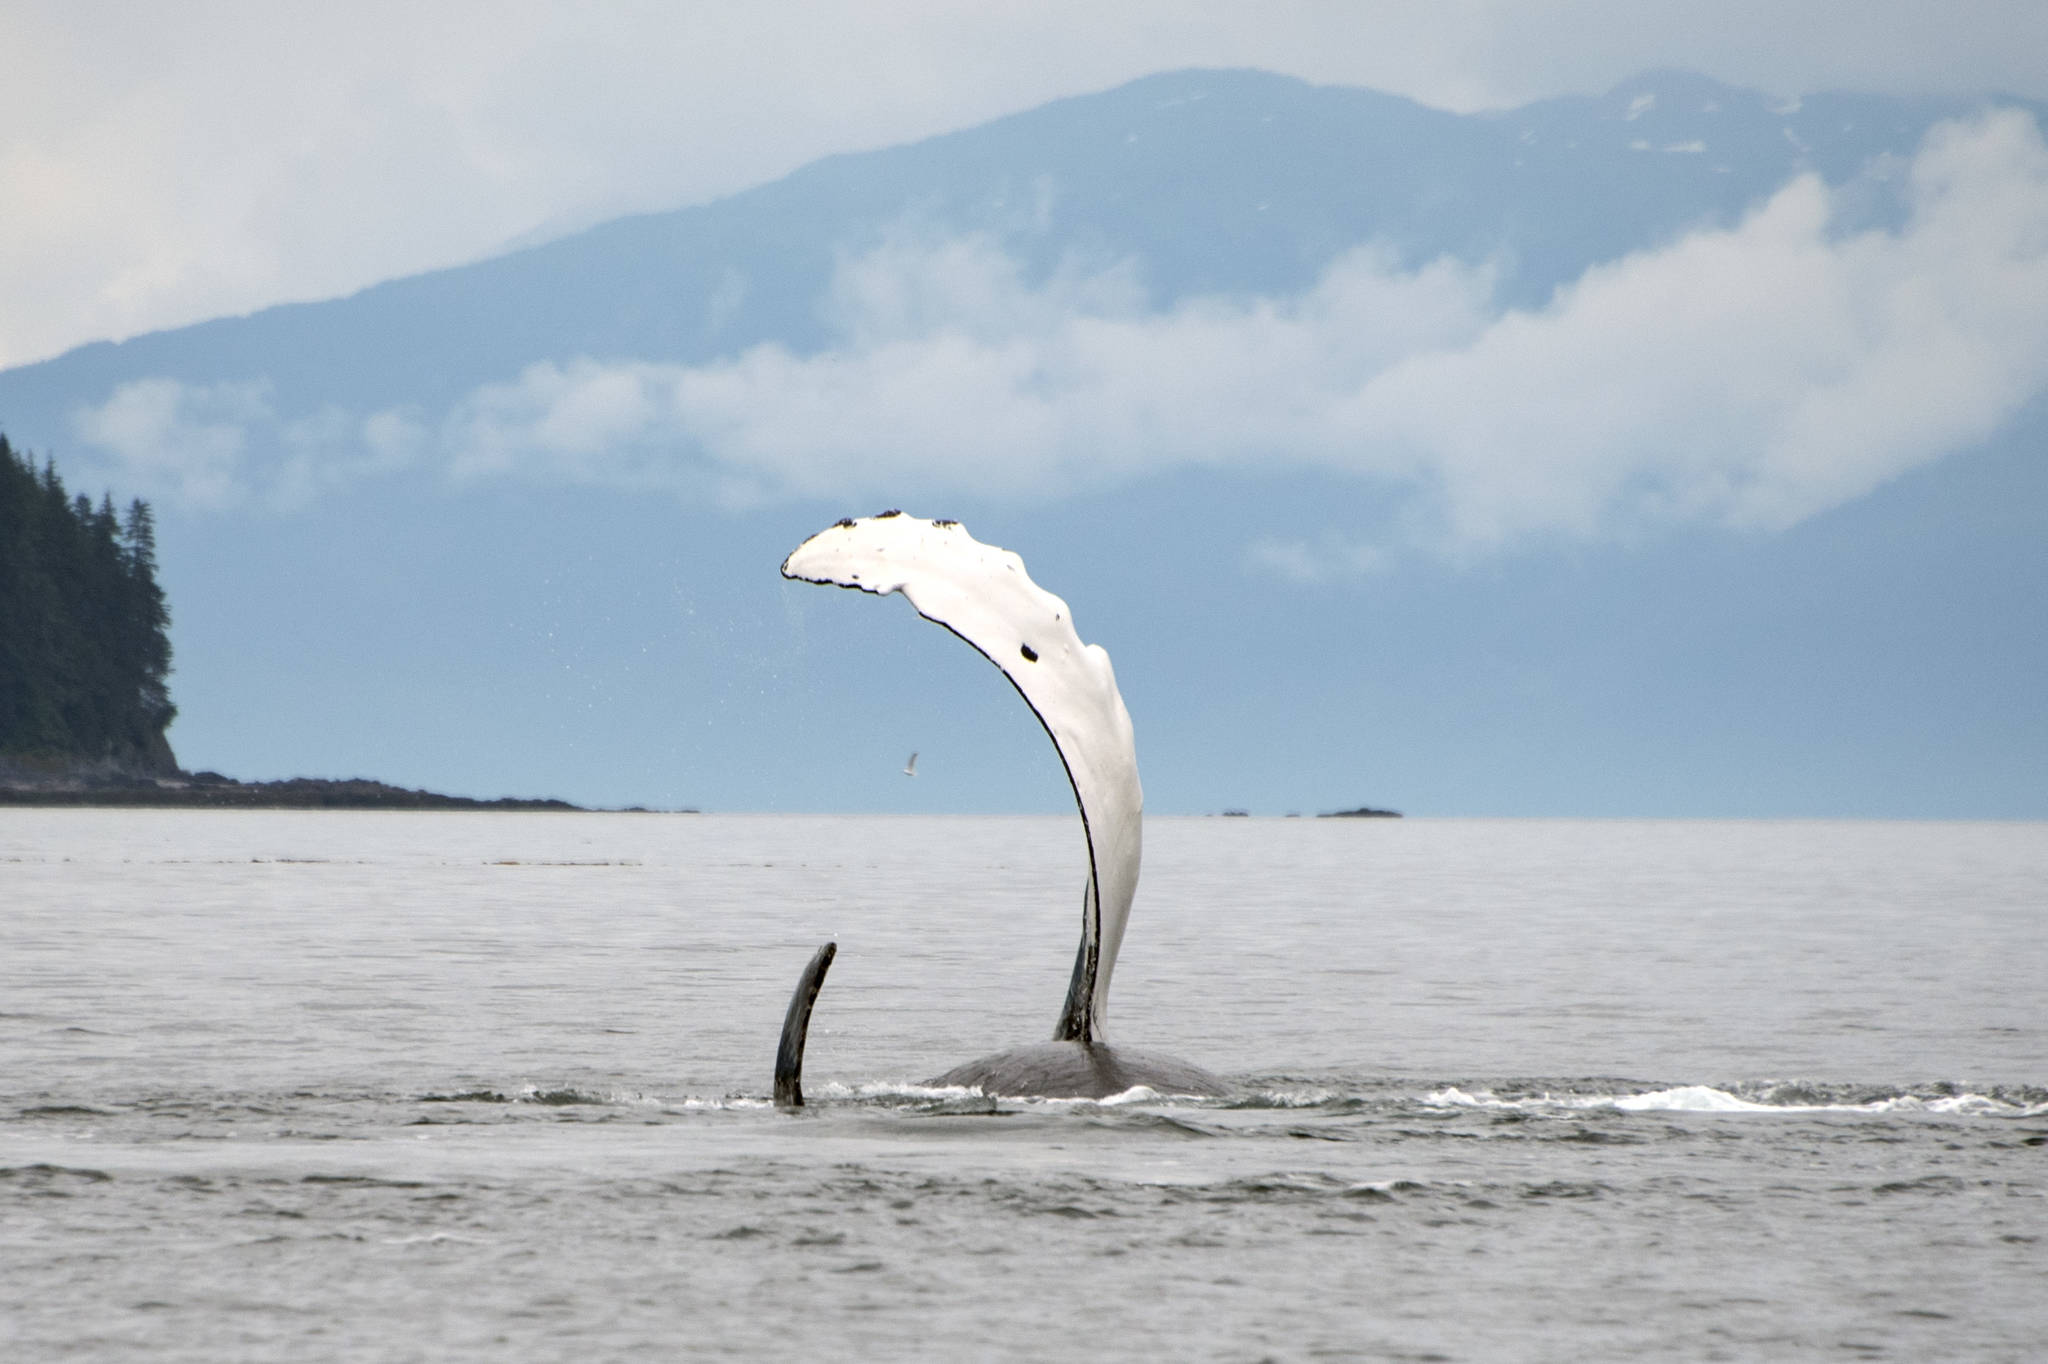 Humpback whales roll with pectoral fins above the water, just outside Tenakee Inlet on July 18. (Courtesy Photo / Kenneth Gill, gillfoto)